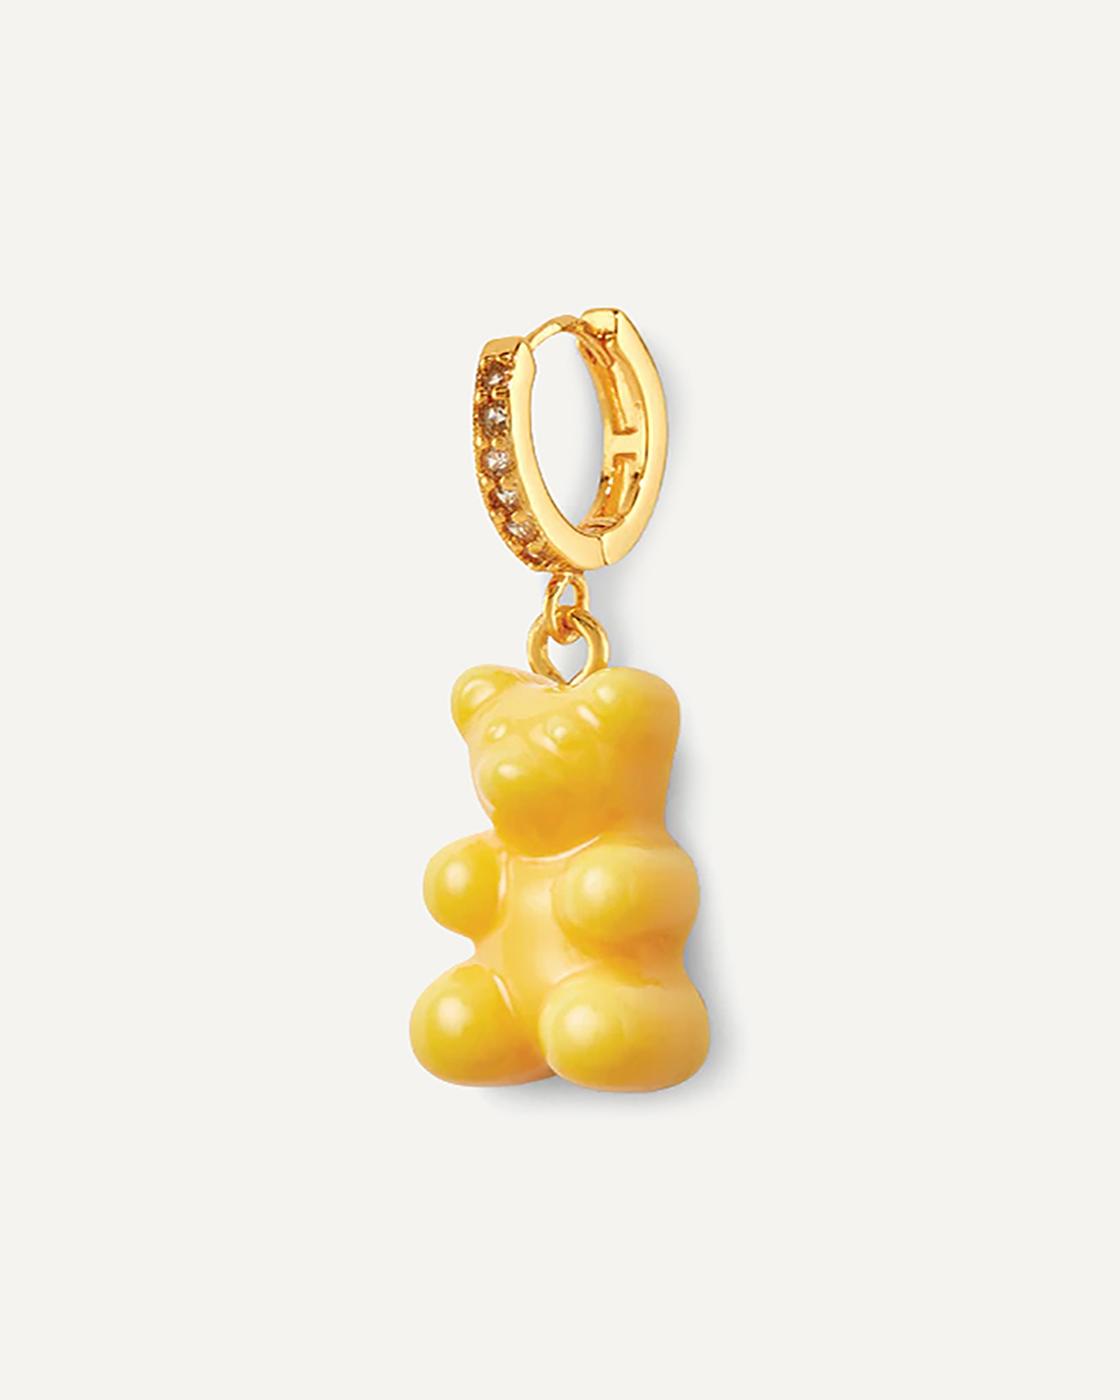 Nostalgia Bear Gold-Plated, Resin and Cubic Zirconia Single Hoop Earring - NYC Taxi yellow